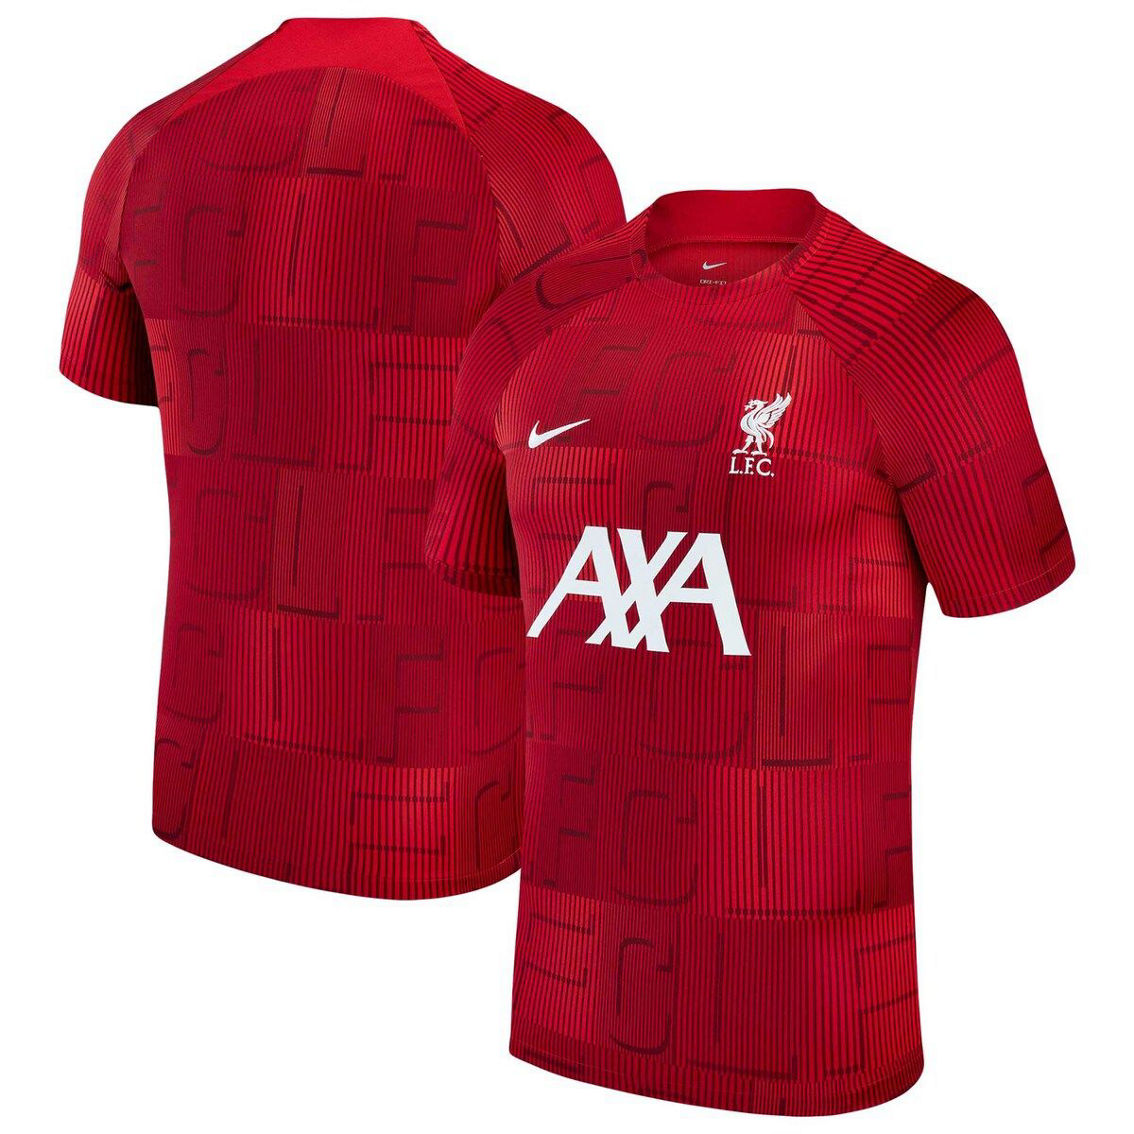 Nike Men's Red Liverpool 2023/24 Academy Pro Pre-Match Top - Image 2 of 4